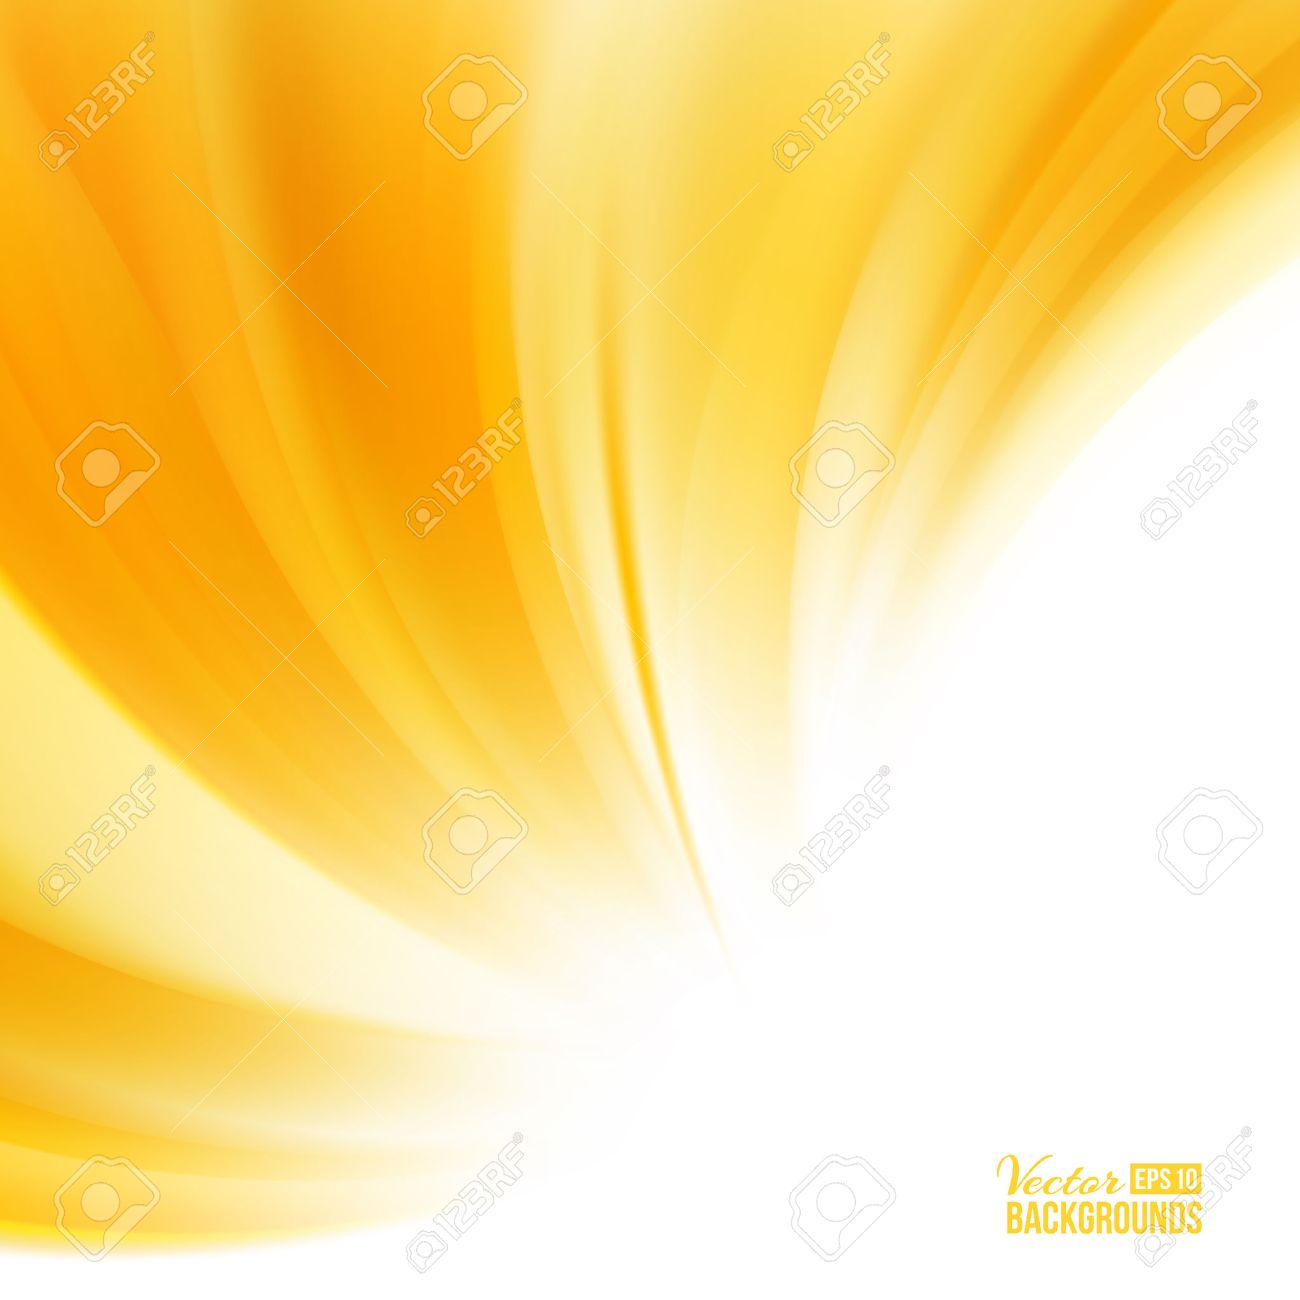 Orange Background With Smooth Waves Royalty Free Cliparts